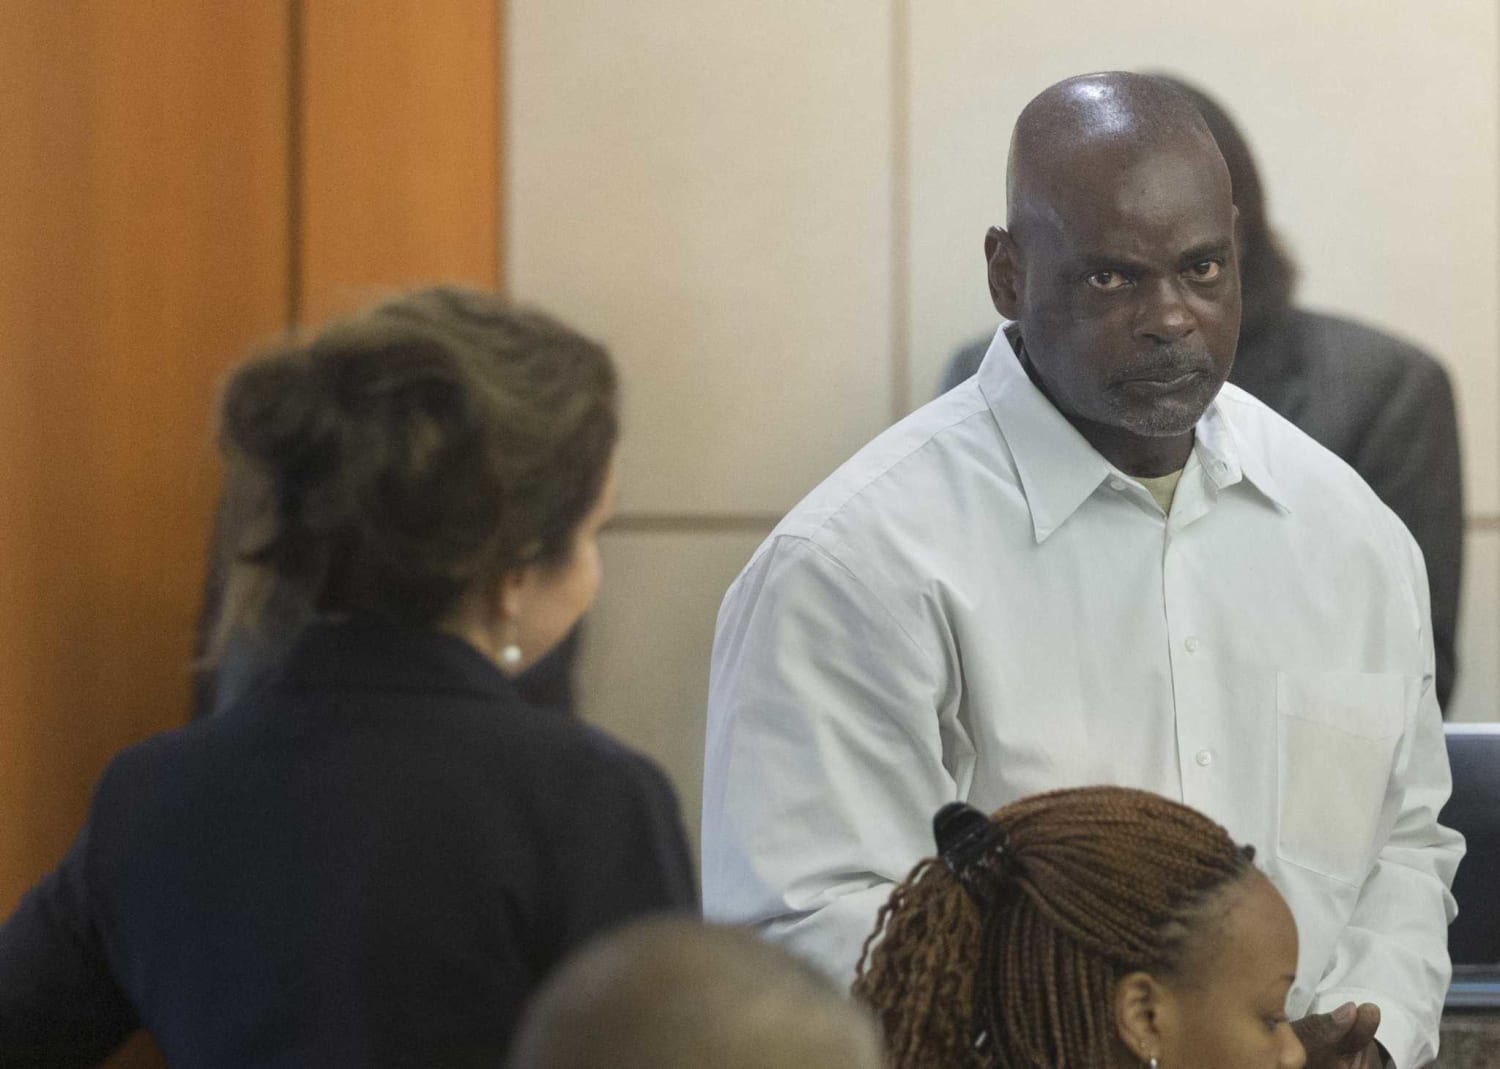 Lawyers say man was wrongly convicted in 1991 in case handled by now-disgraced former narcotics officer Goines